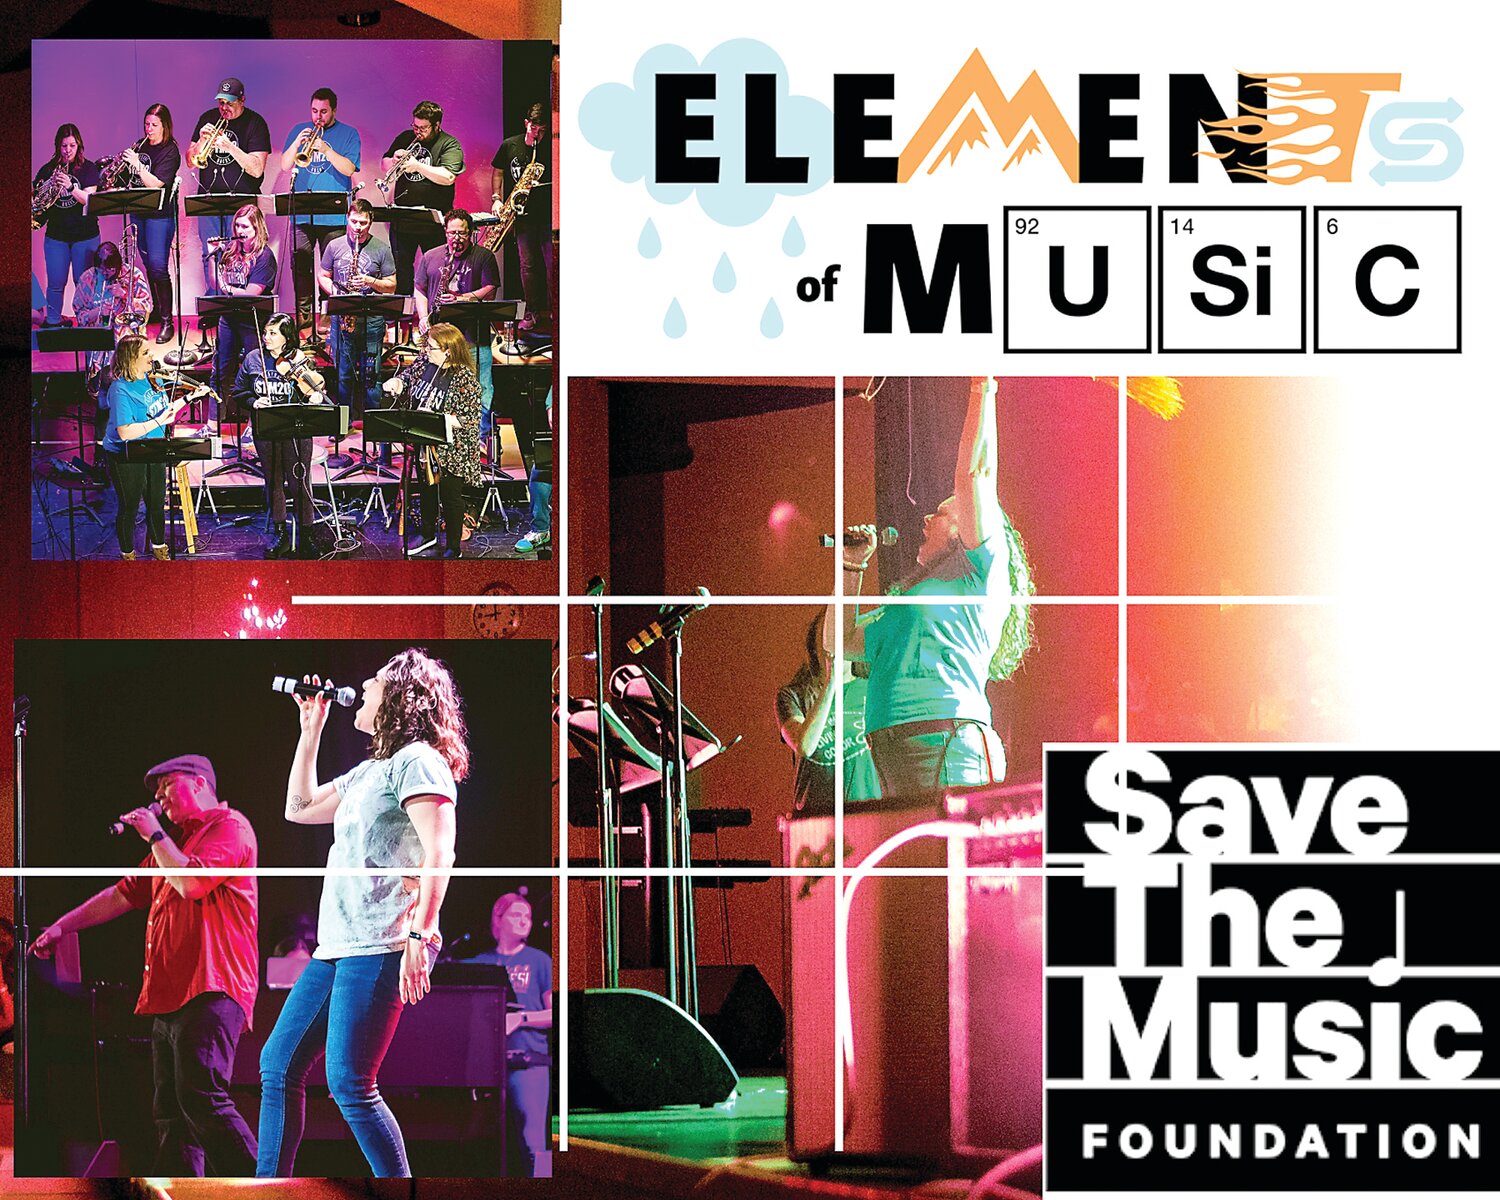 The CB Save the Music Concert, to benefit the Save the Music Foundation, takes place Jan. 26 and 27 at Holicong Middle School, 2900 Holicong Road, Doylestown. The theme is “Elements of Music.”